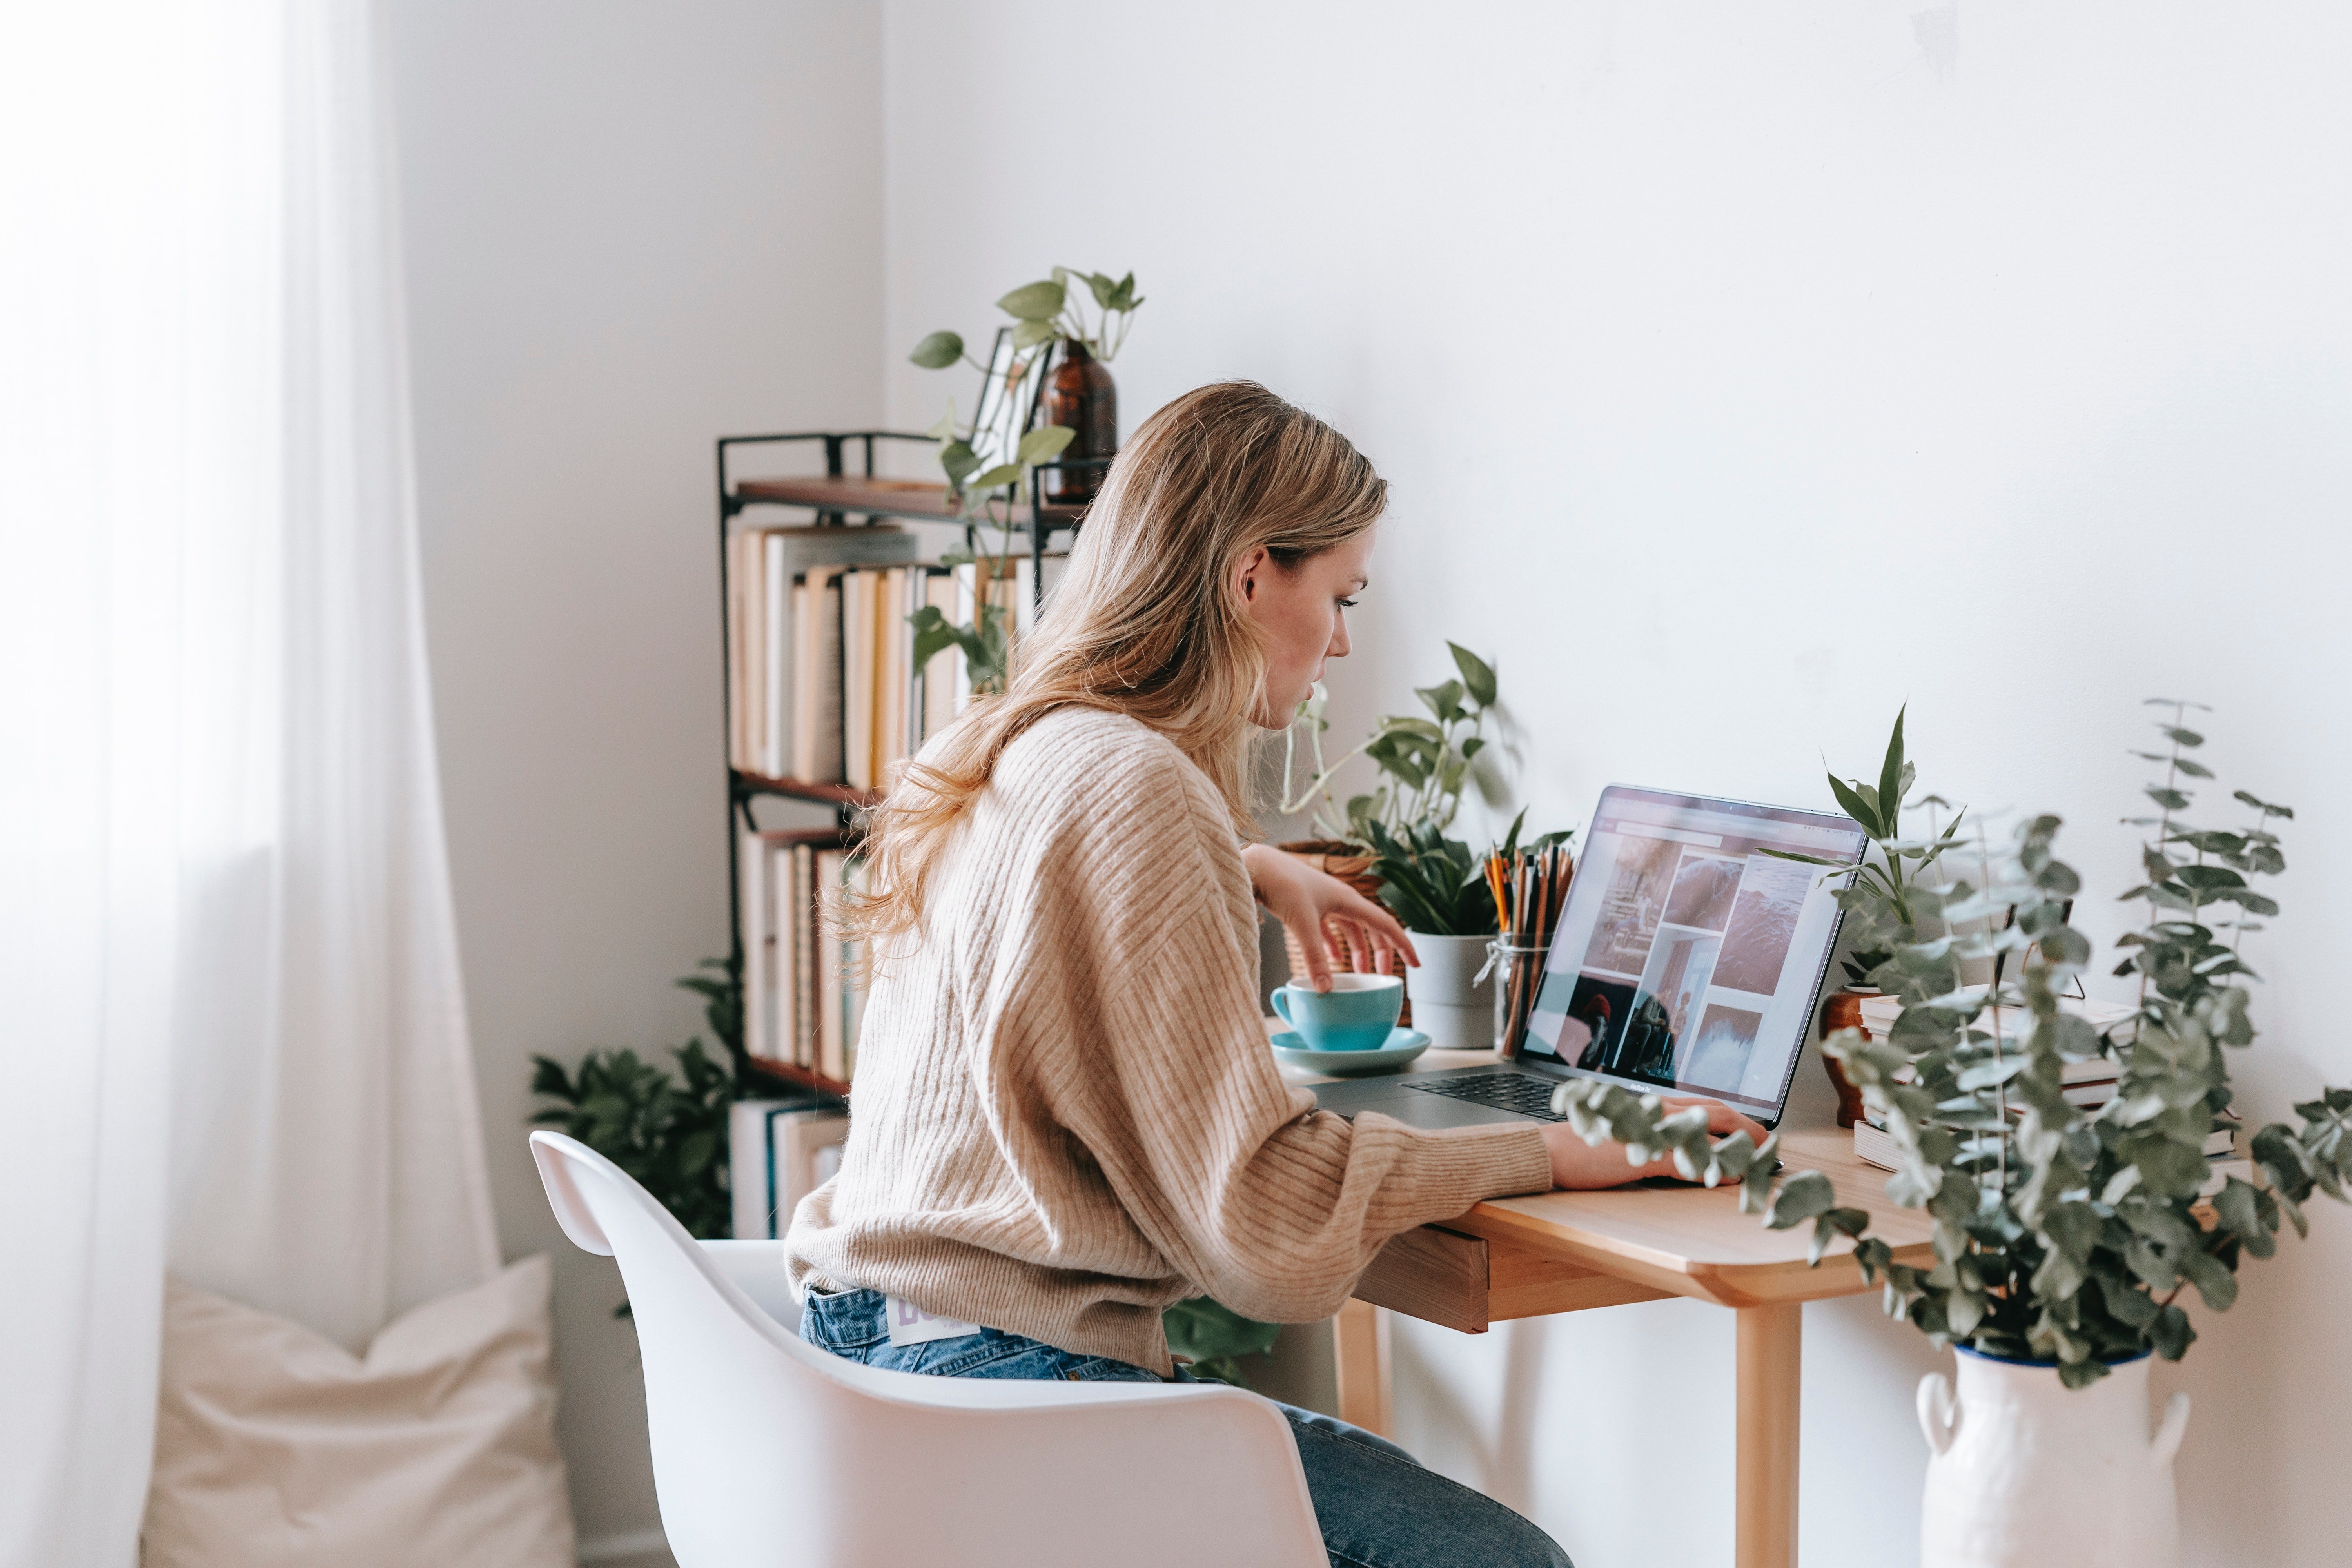 Paula returned from the UK and immediately began working hard at her parents' company. | Source: George Milton/Pexels